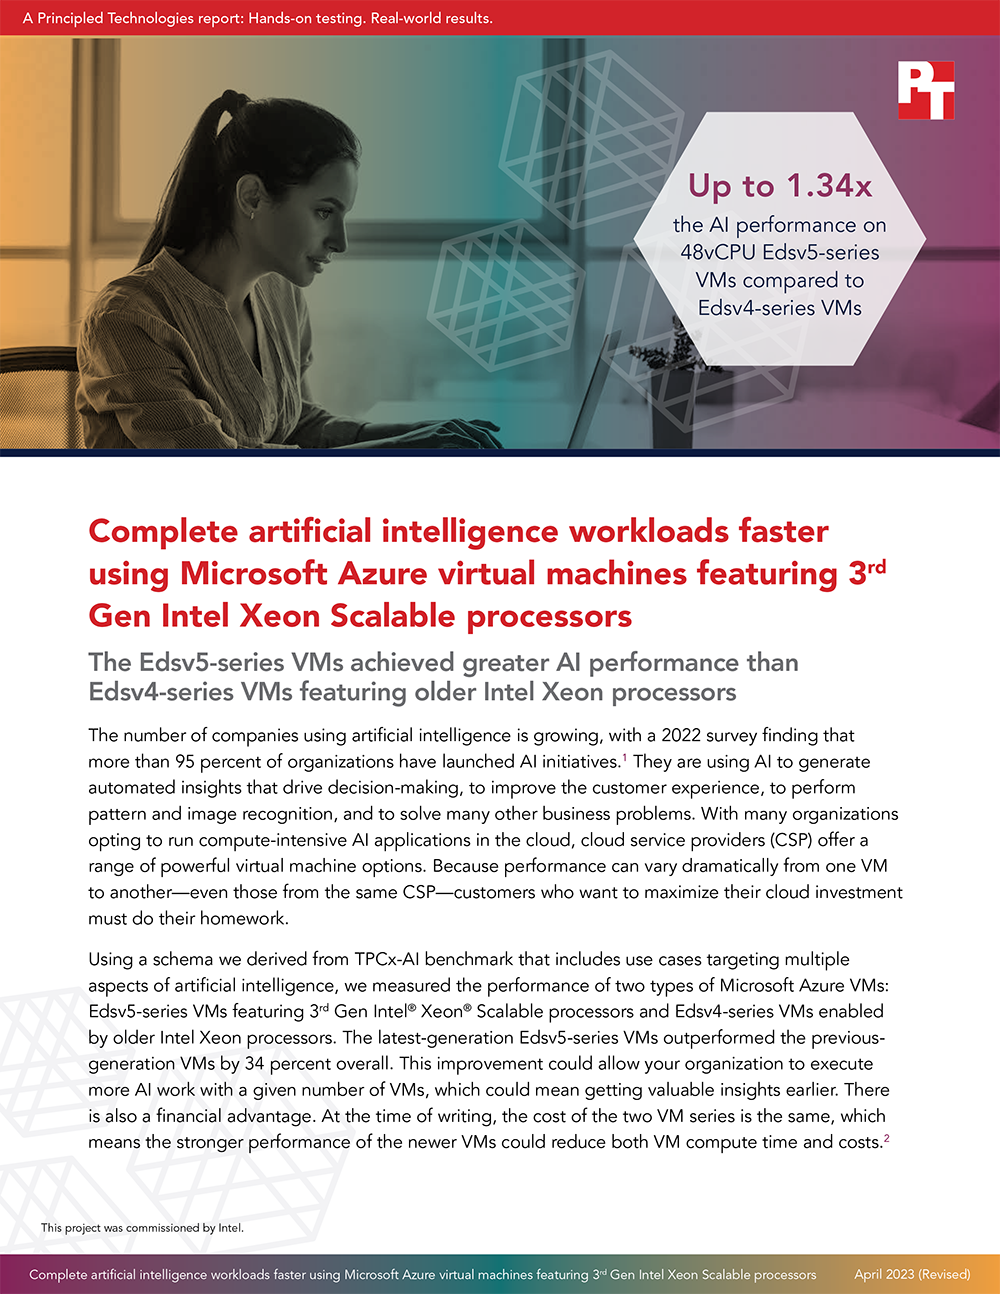 Complete artificial intelligence workloads faster using Microsoft Azure virtual machines featuring 3rd Gen Intel Xeon Scalable processors